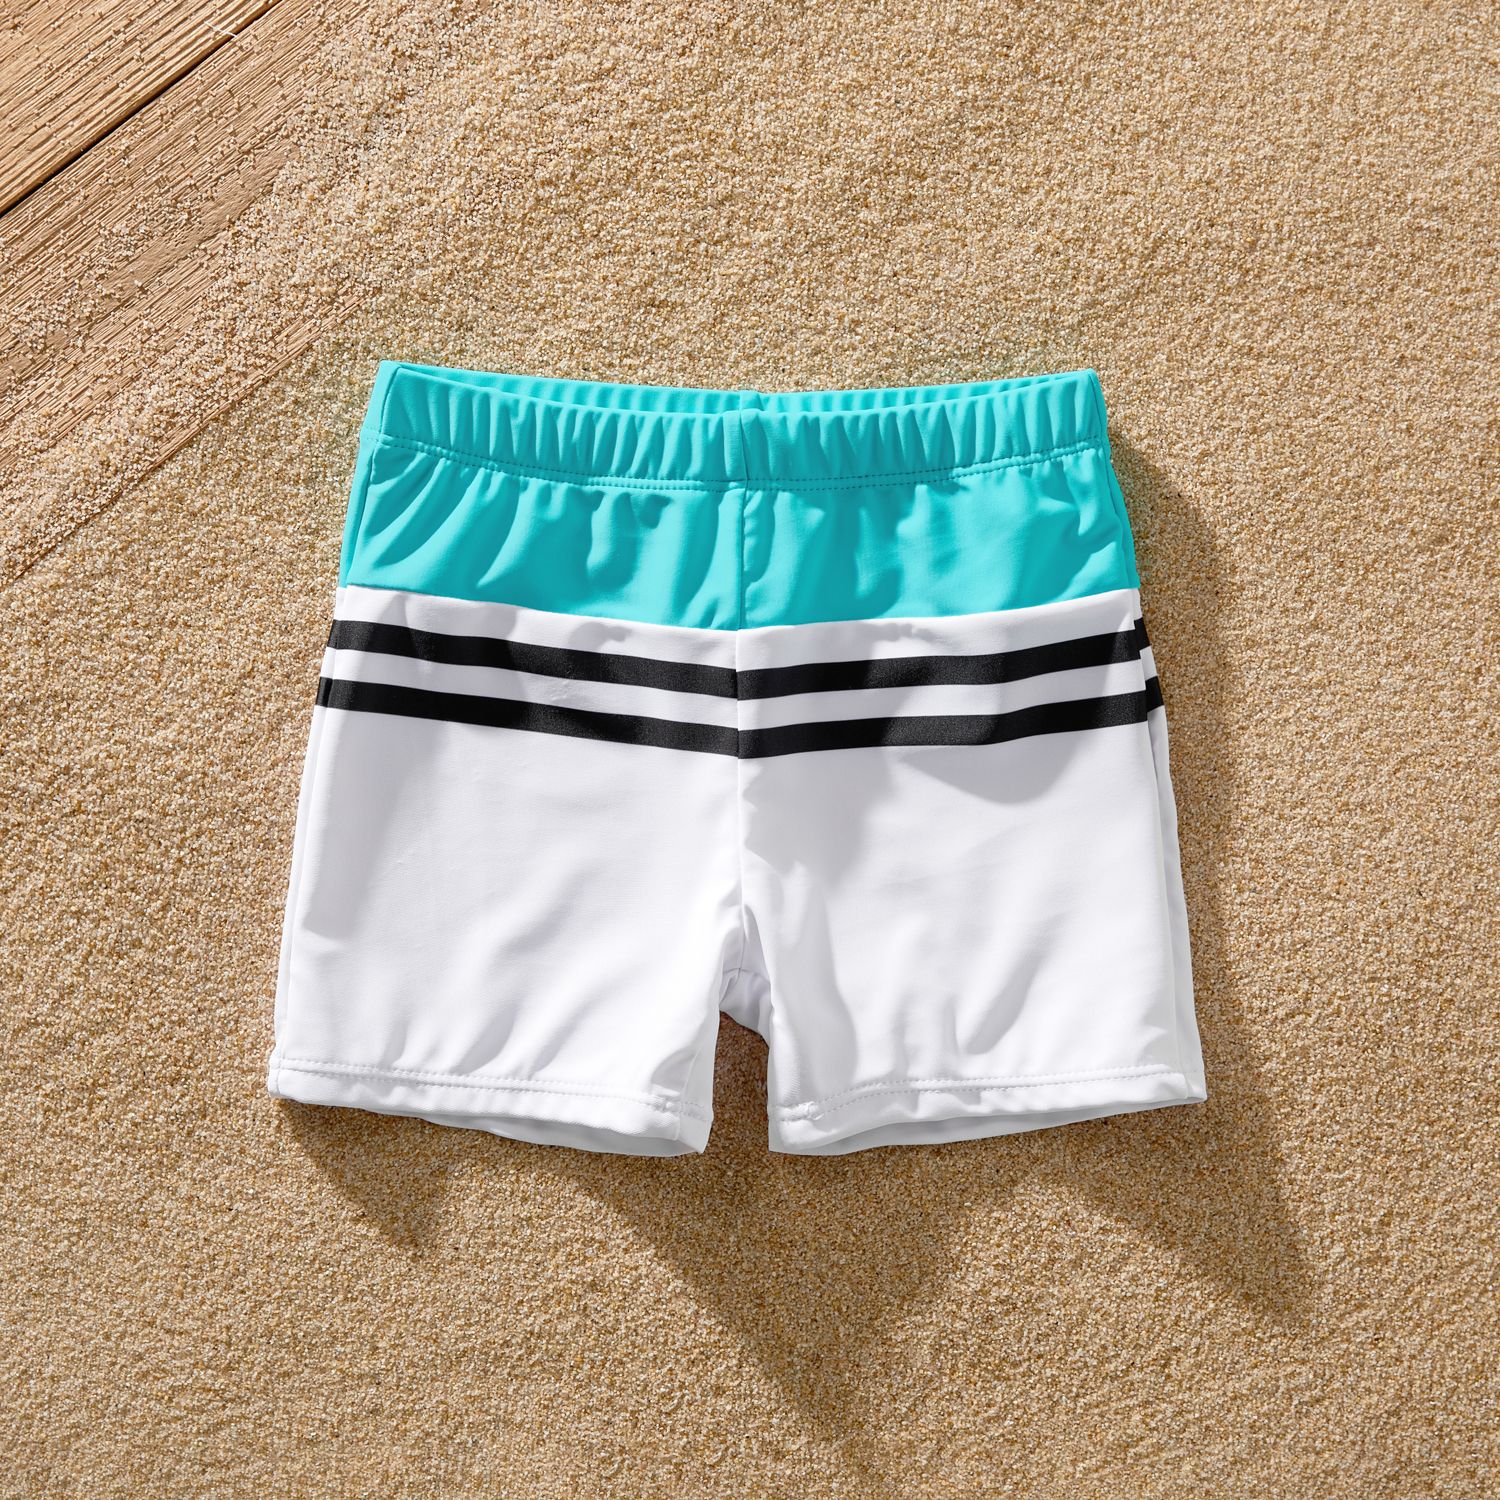 Family Matching Colorblock Striped Spliced Bow Side One-piece Swimsuit Or Swim Trunks Shorts